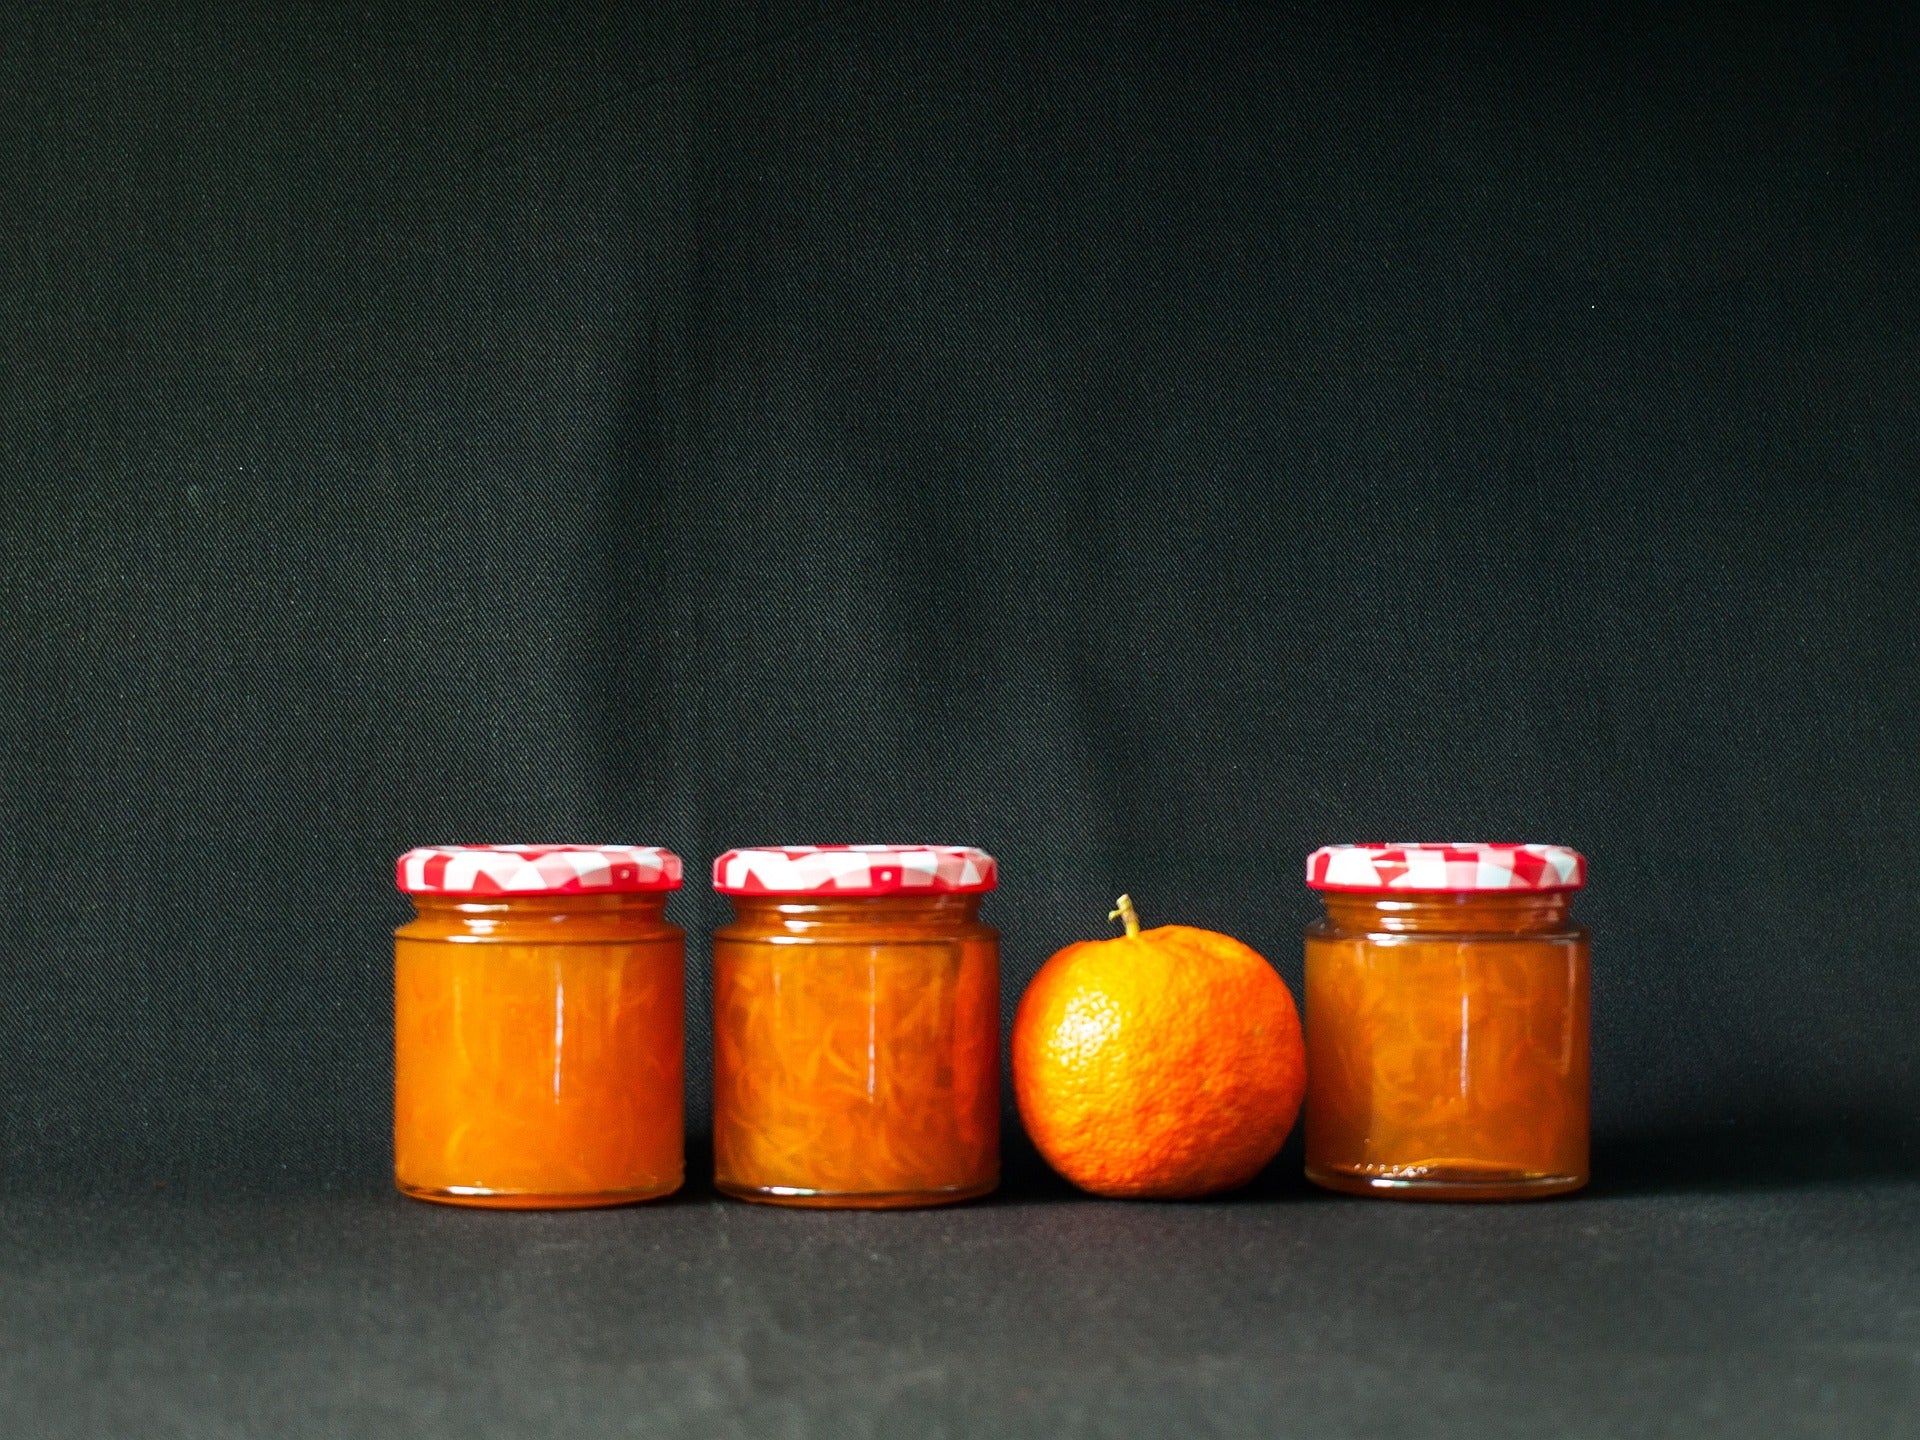 How to Make Homemade Orange Marmalade or Jelly for Holiday Gifts